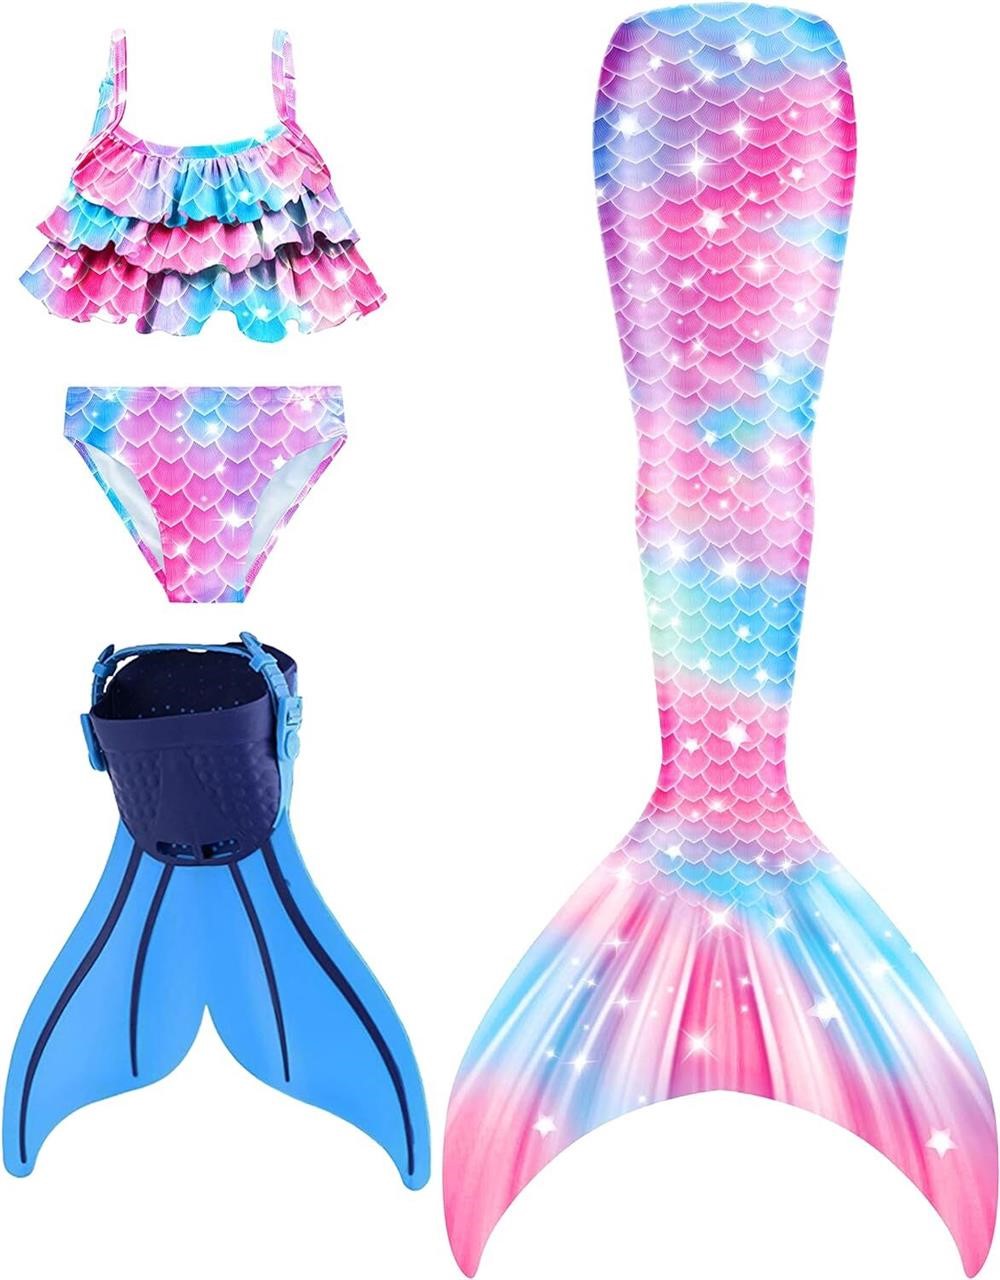 DNFUN Mermaid Tails for Girls Age 9-10